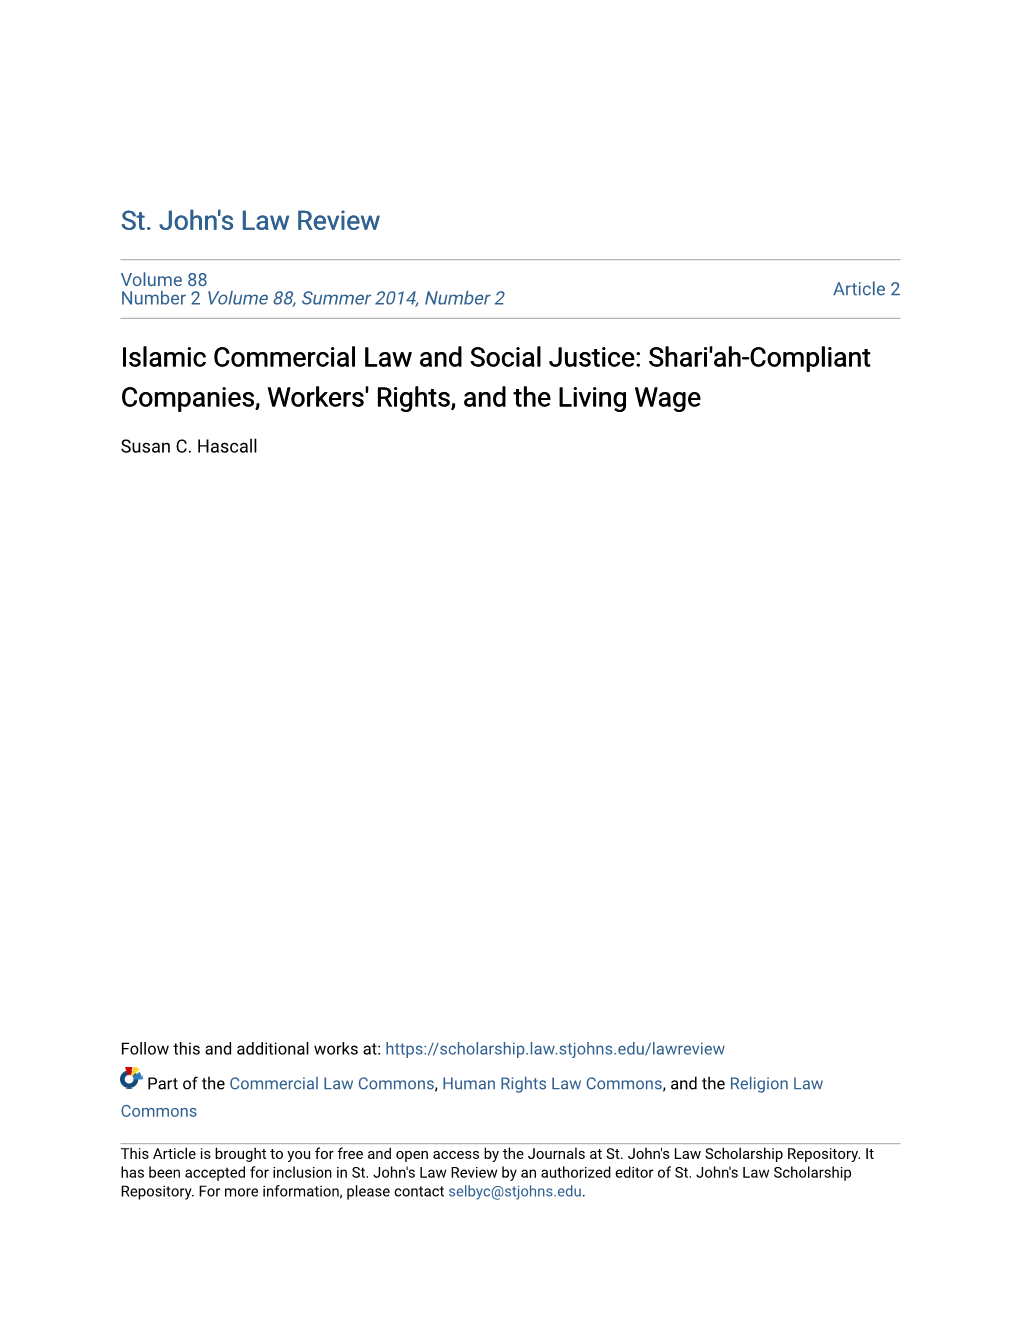 Islamic Commercial Law and Social Justice: Shari'ah-Compliant Companies, Workers' Rights, and the Living Wage